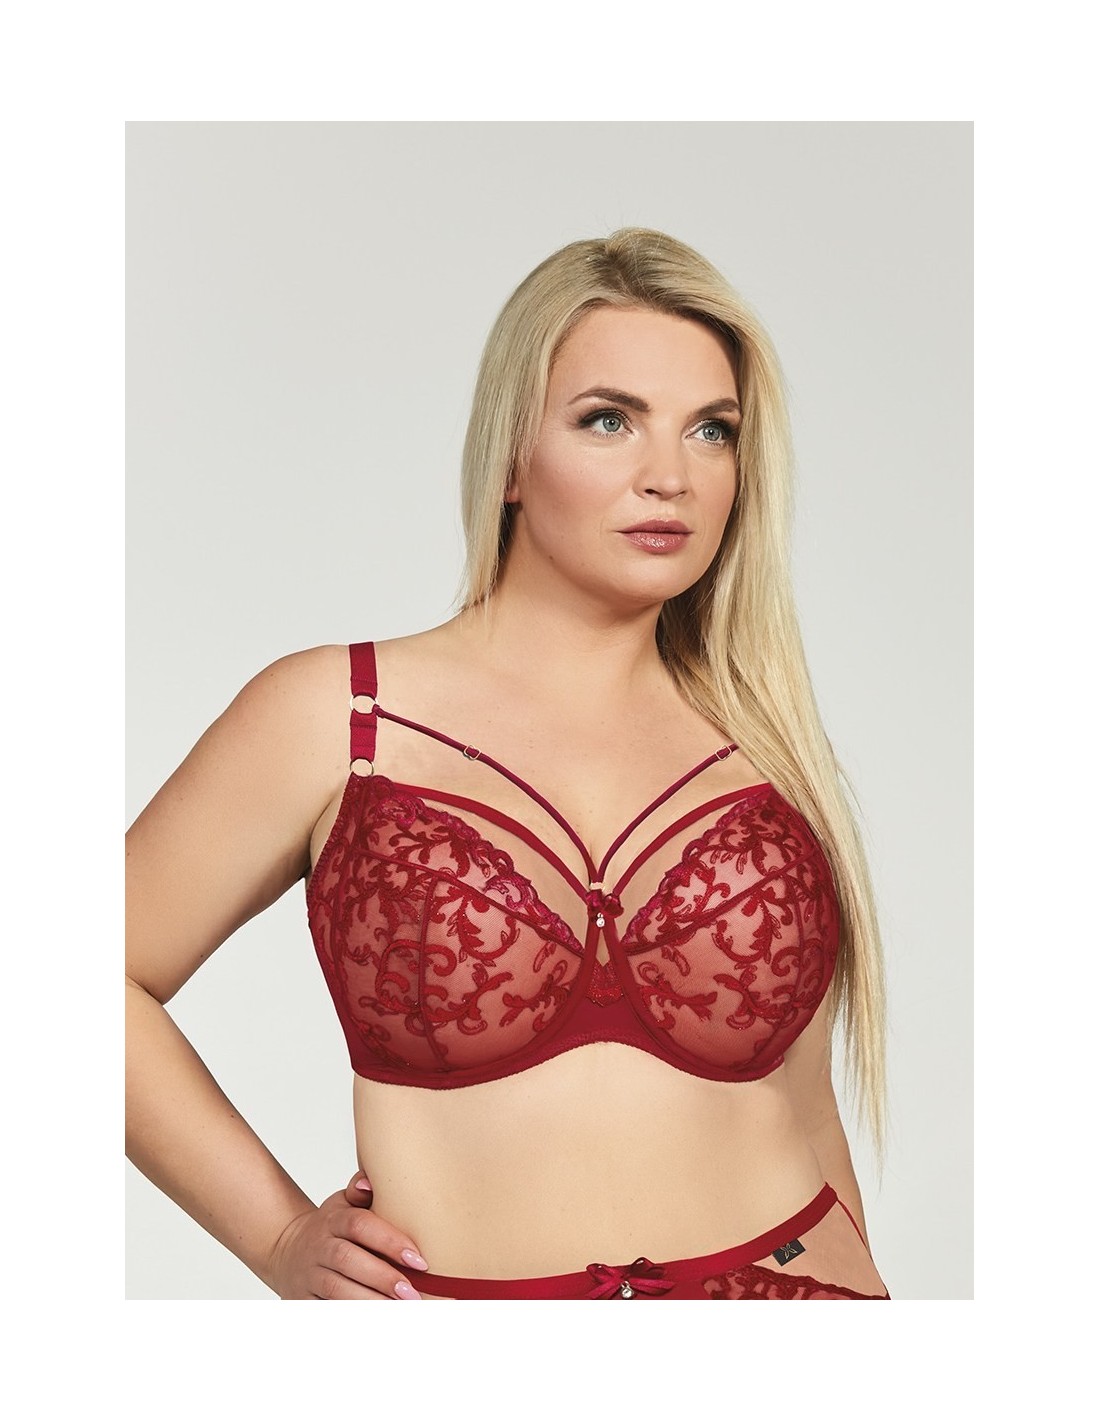 Plus Size Bra with Soft Full Cups with Underwire and Lace - Krisline CLARISA